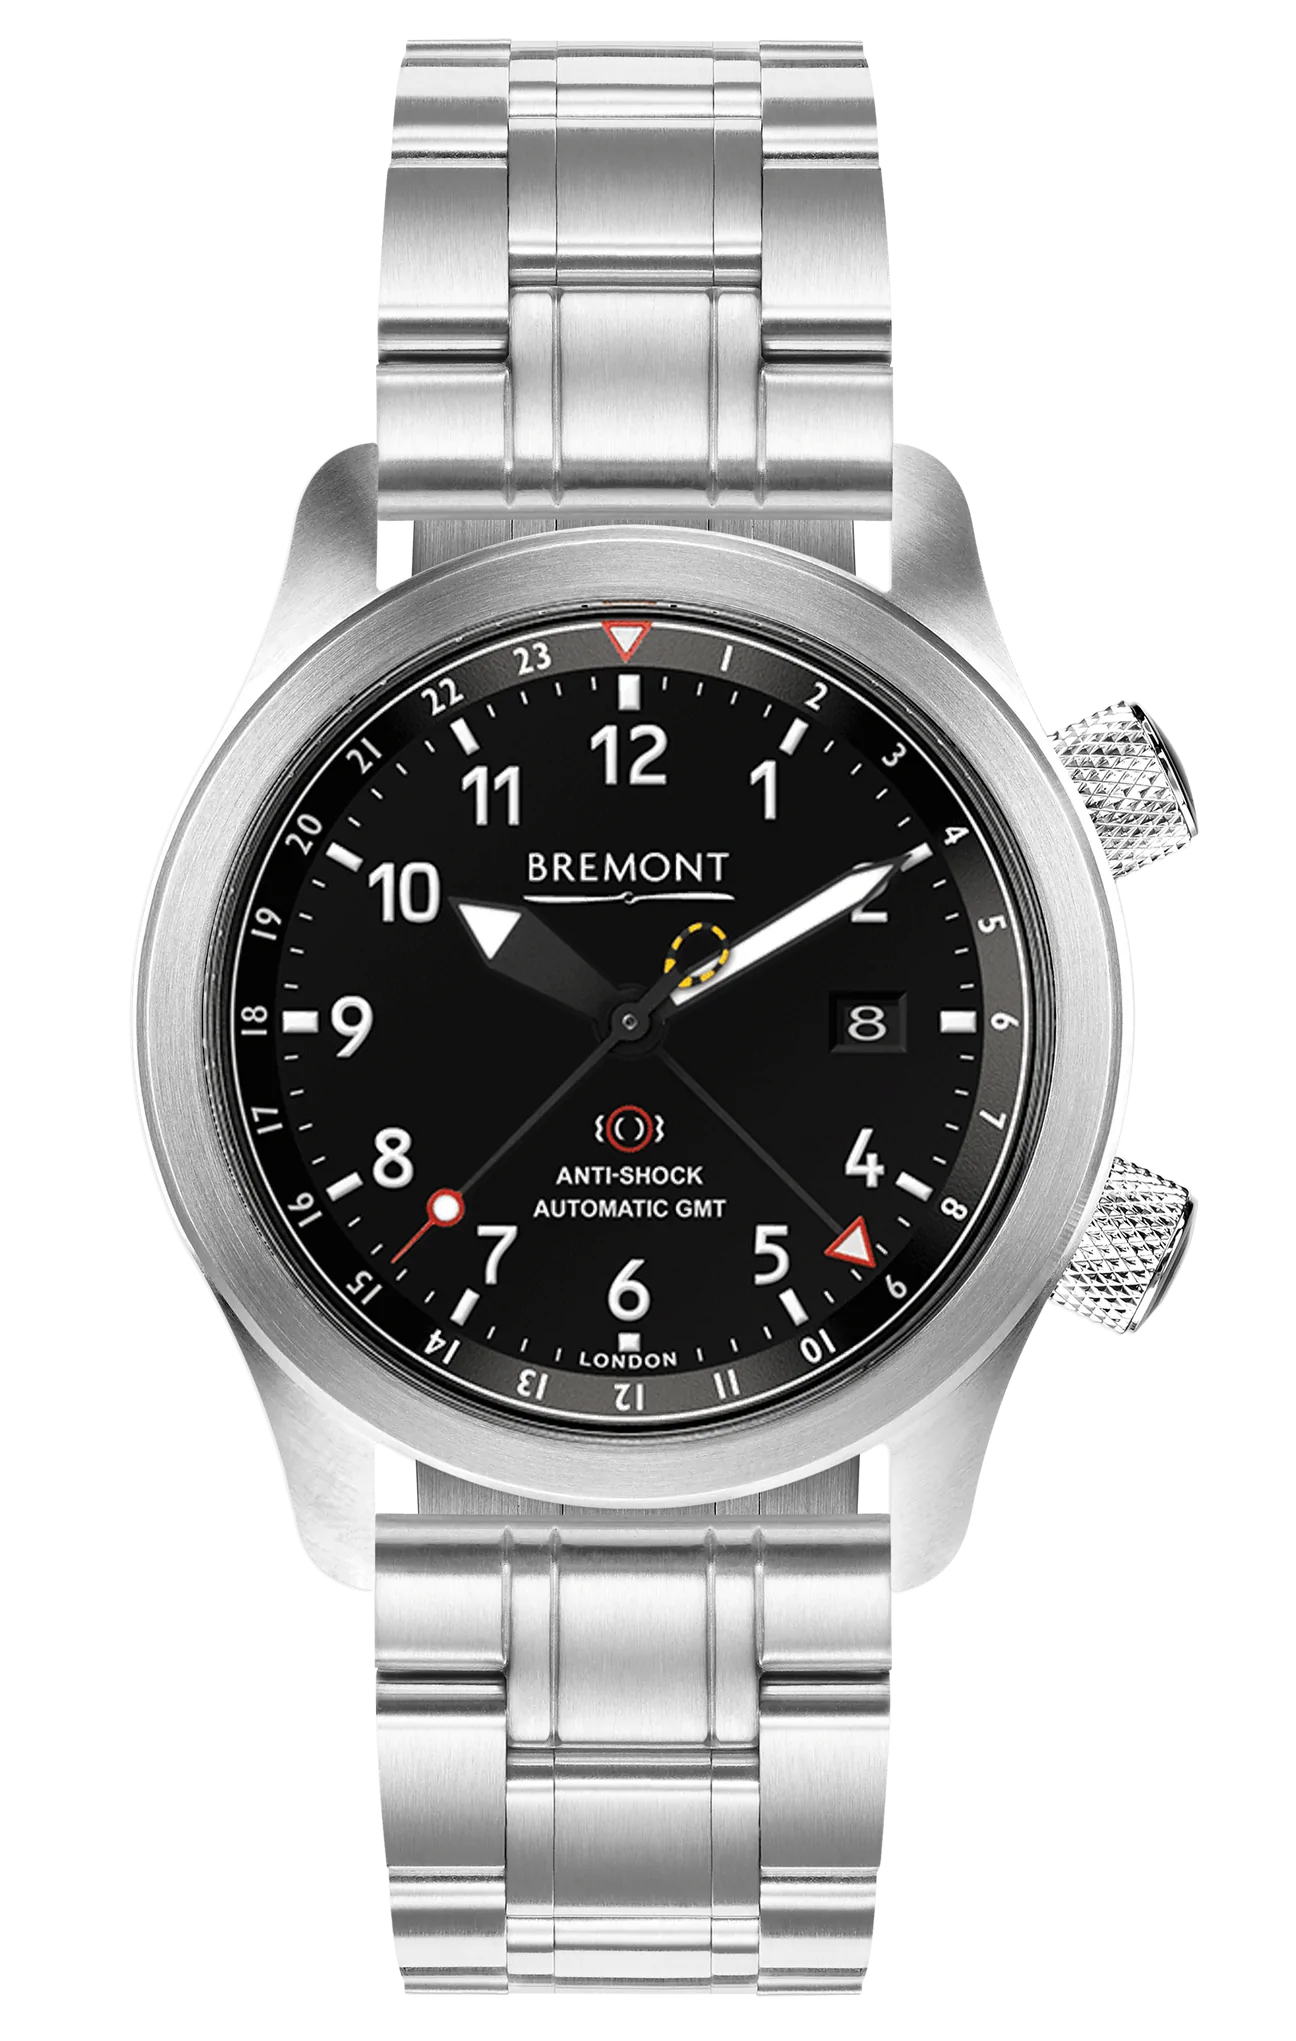 THE IMMORTALS – The Bremont MBIII is a pilot’s watch with one hell of a backstory